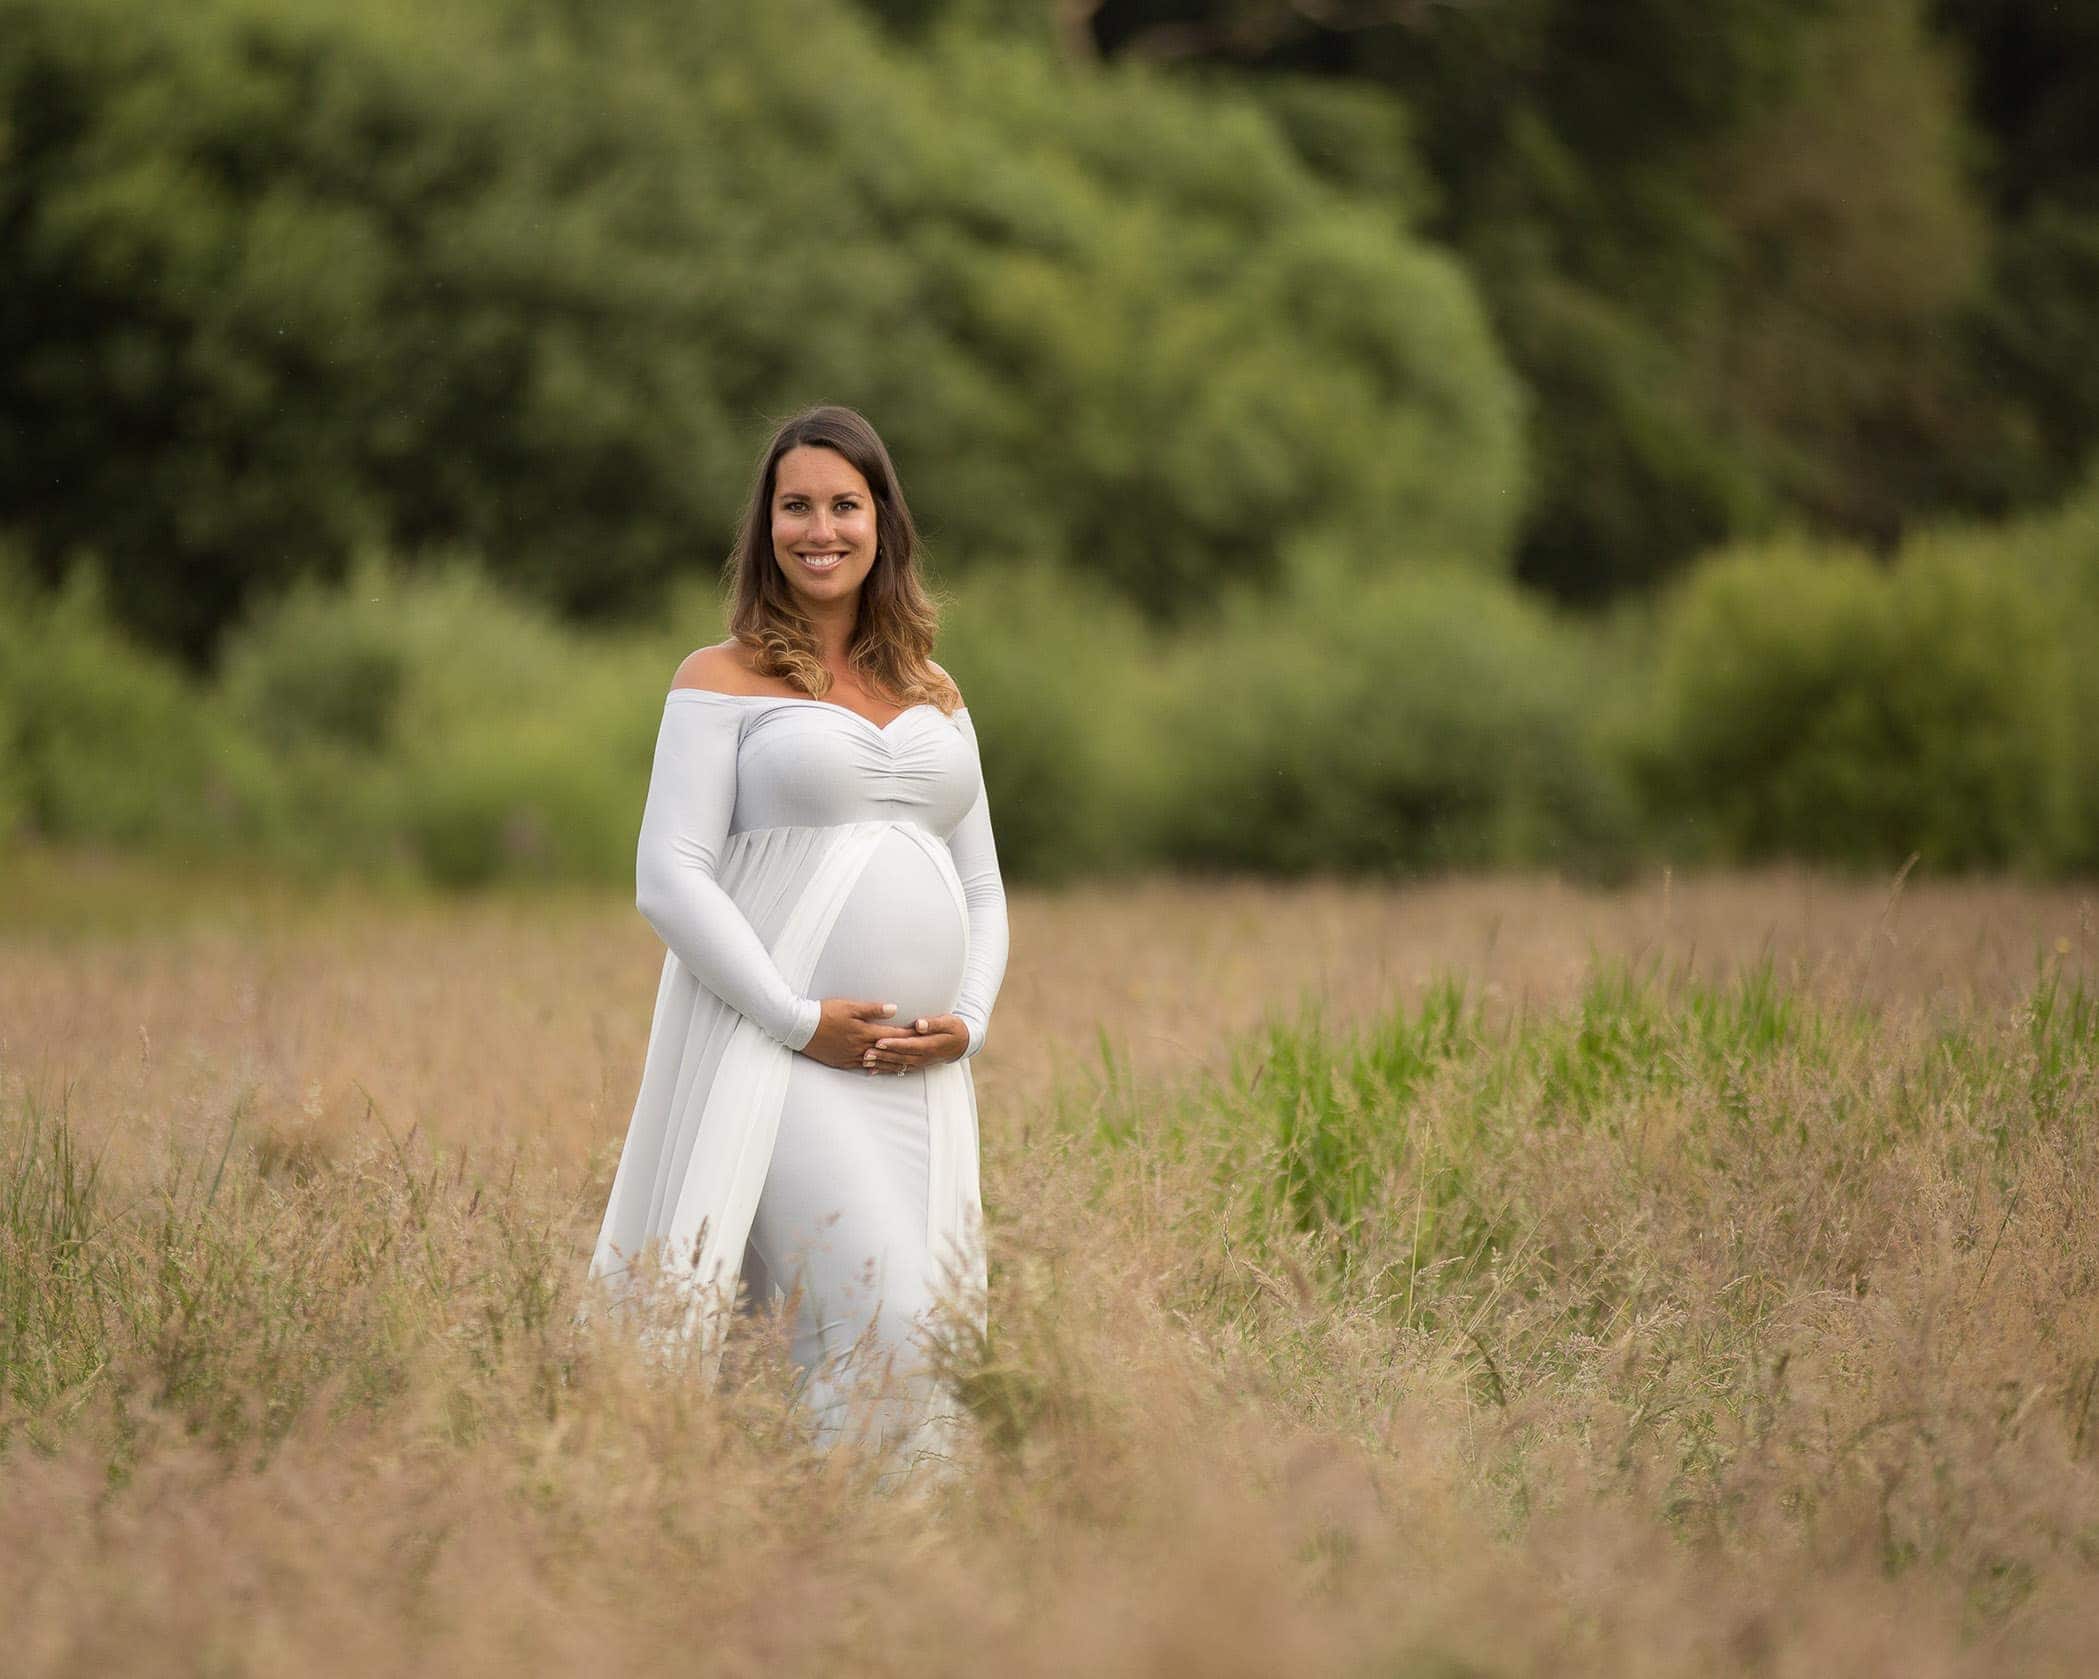 Location maternity photography session